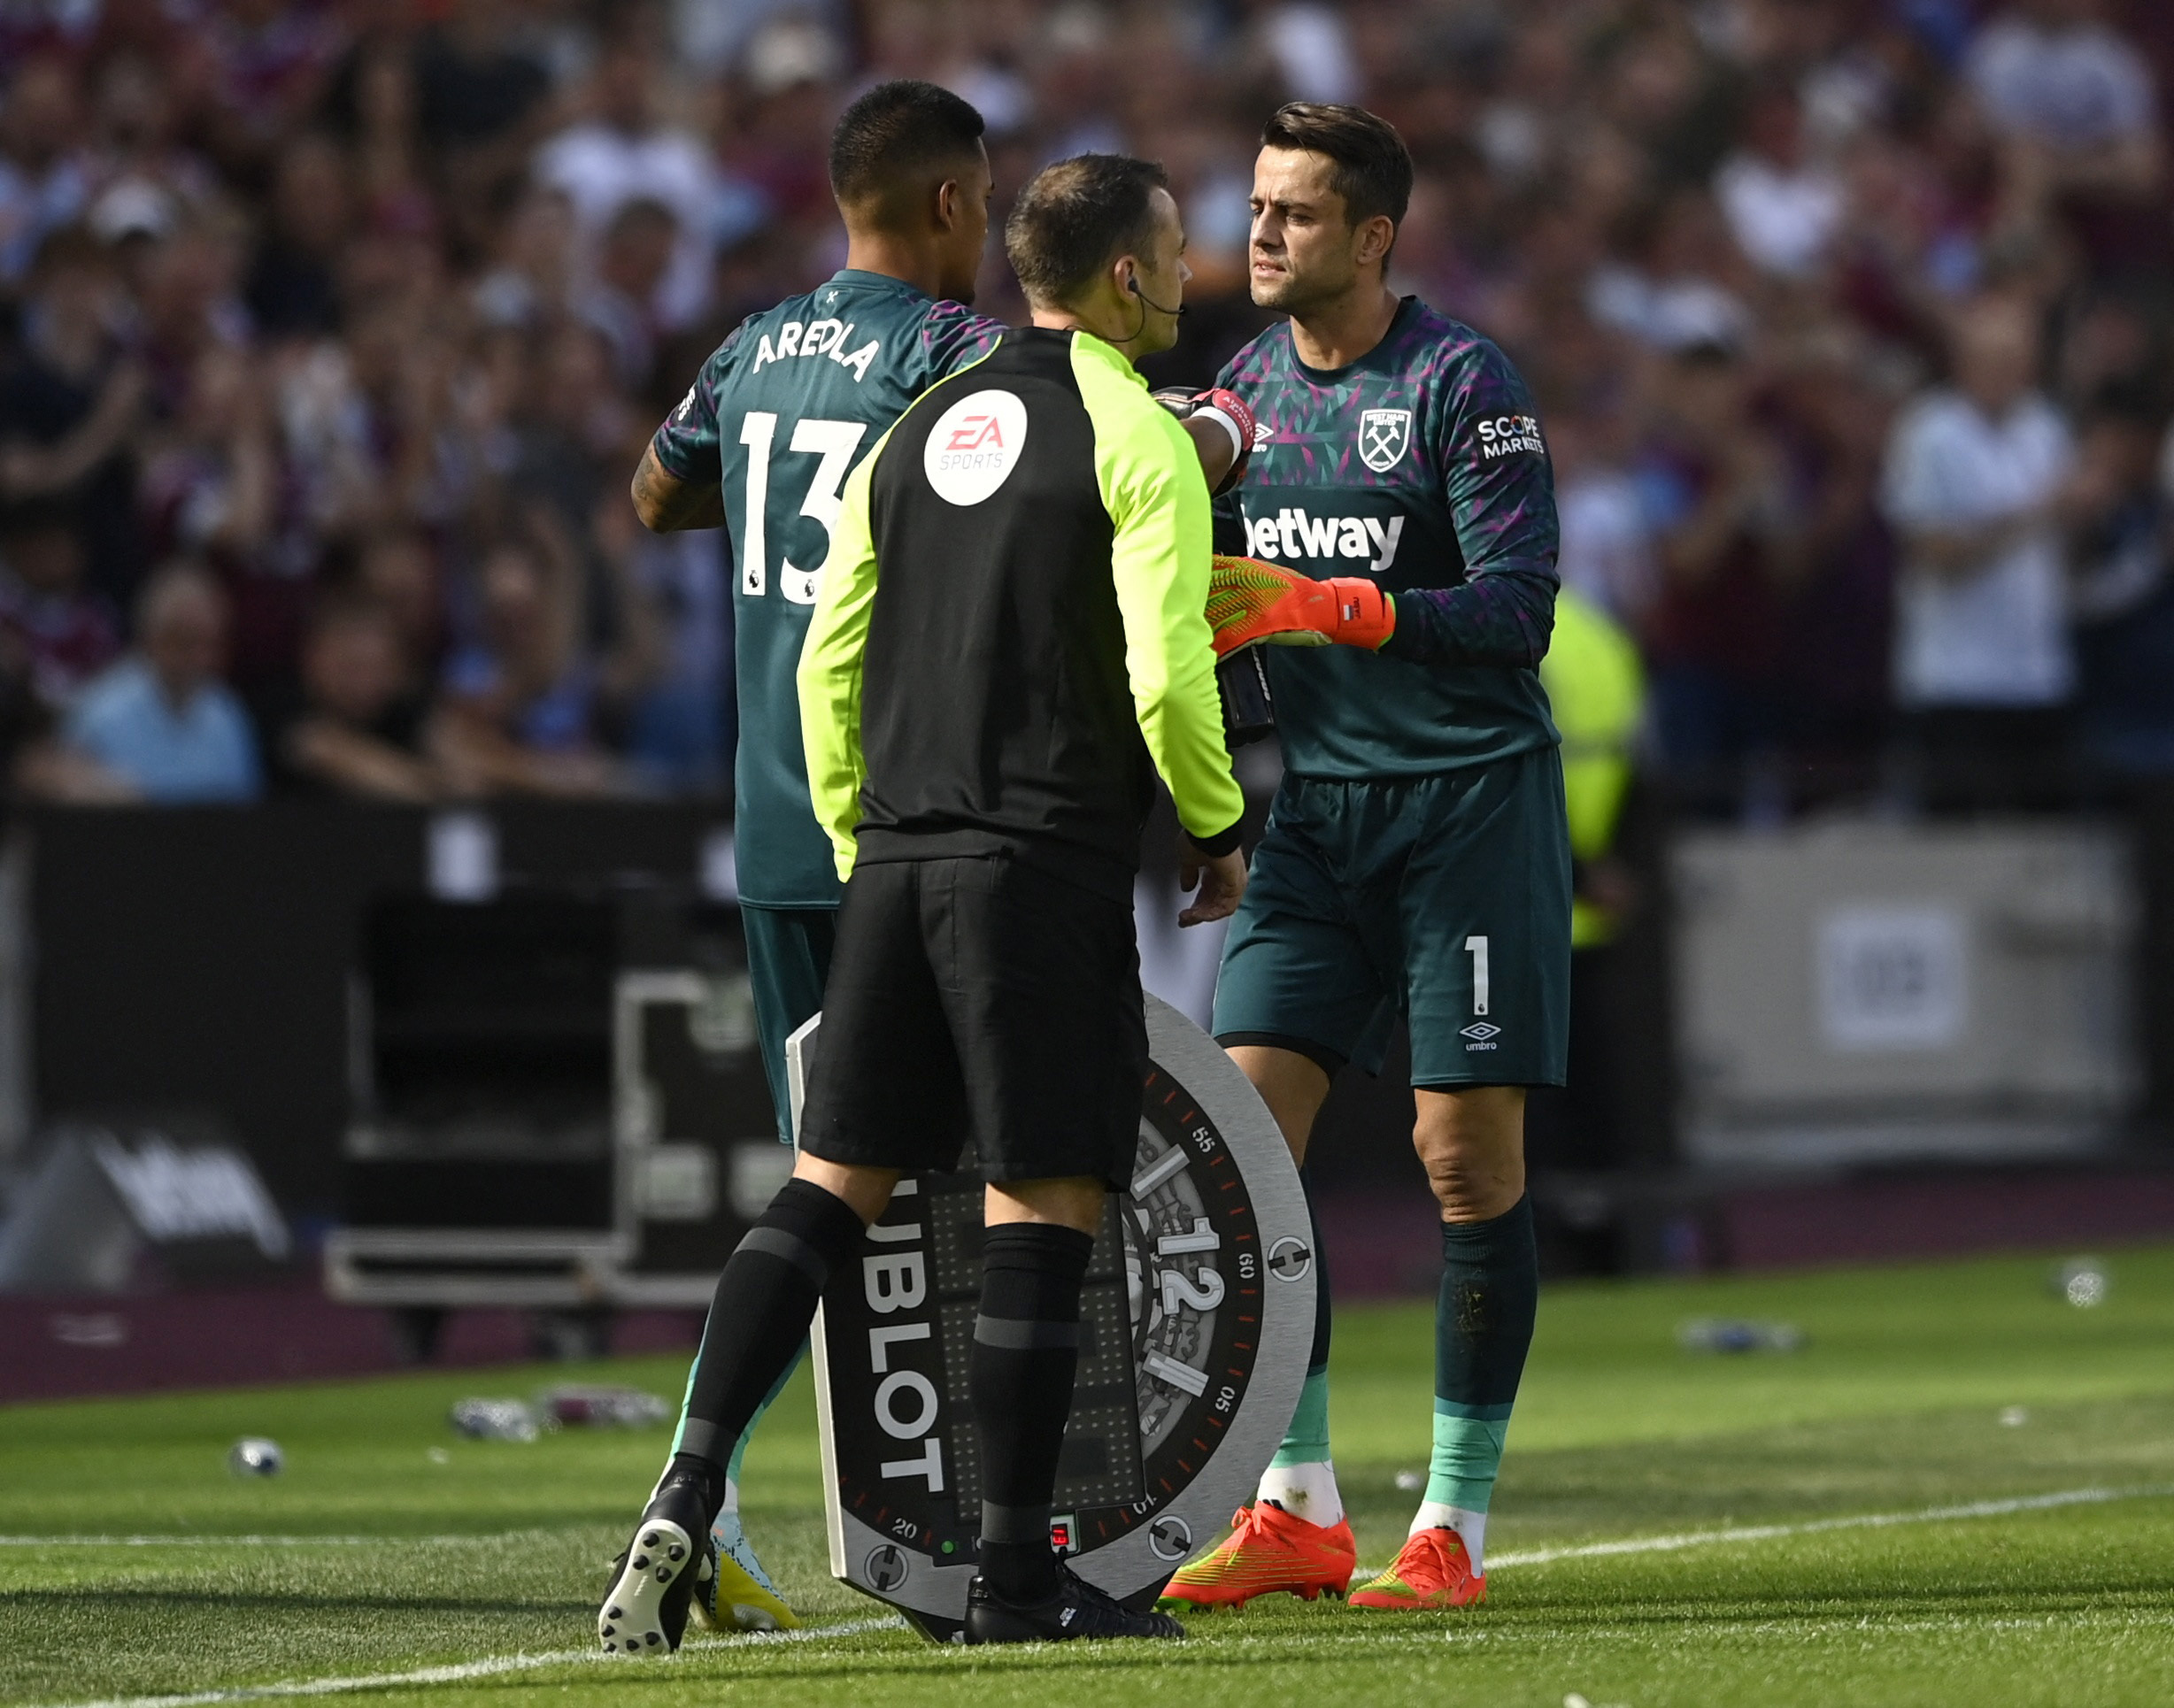 West Ham's Fabianski leaves the pitch after injury